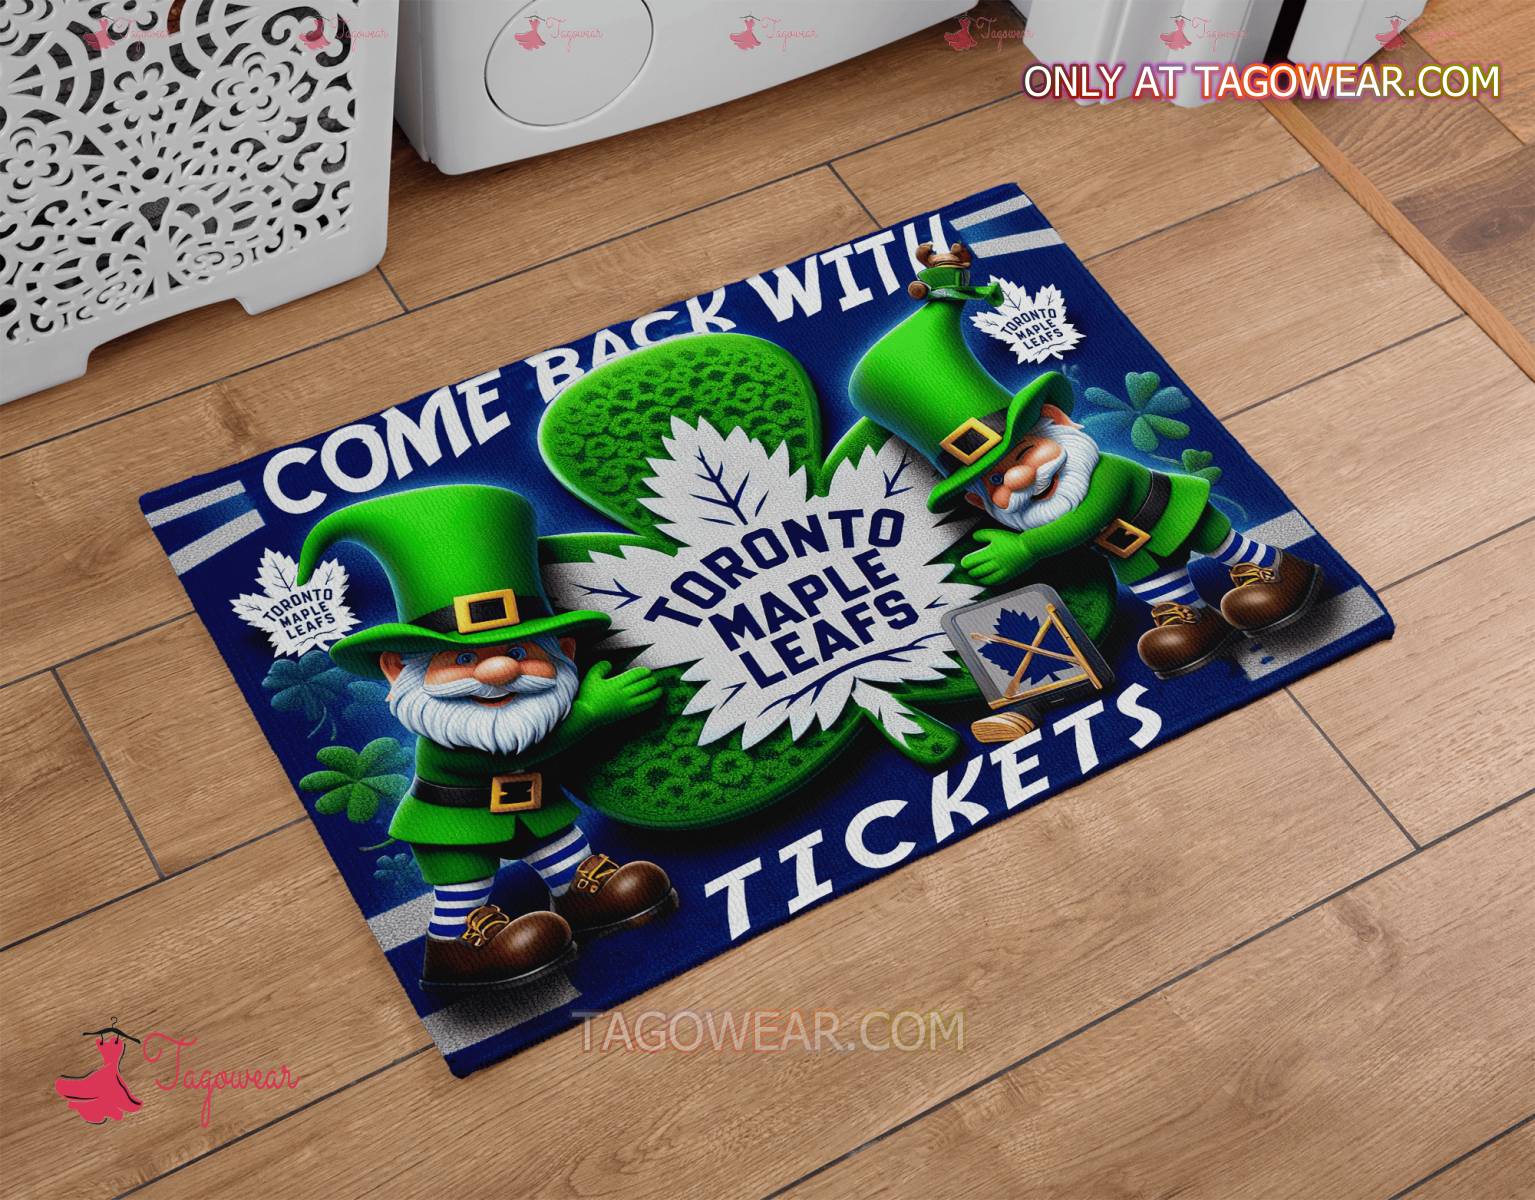 Come Back With Toronto Maple Leafs Tickets Doormat